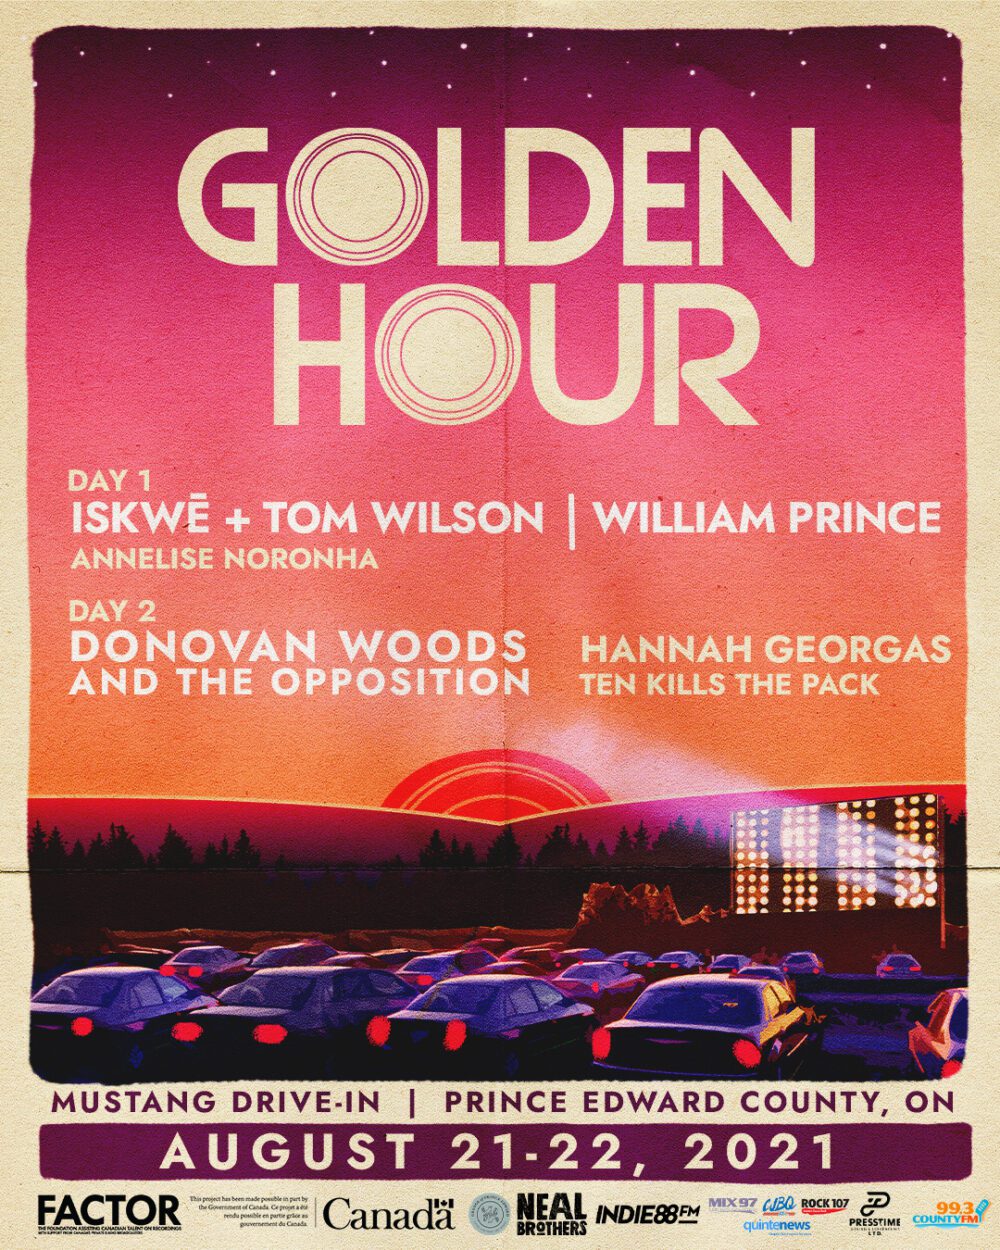 Golden Hour poster listing artist lineup Iskwe and Tom Wilson, William Prince, Annelise Noronha on Aug 21 and Donovan Woods, Hannah Georgas, and Ten Kills the Pack on Aug 22